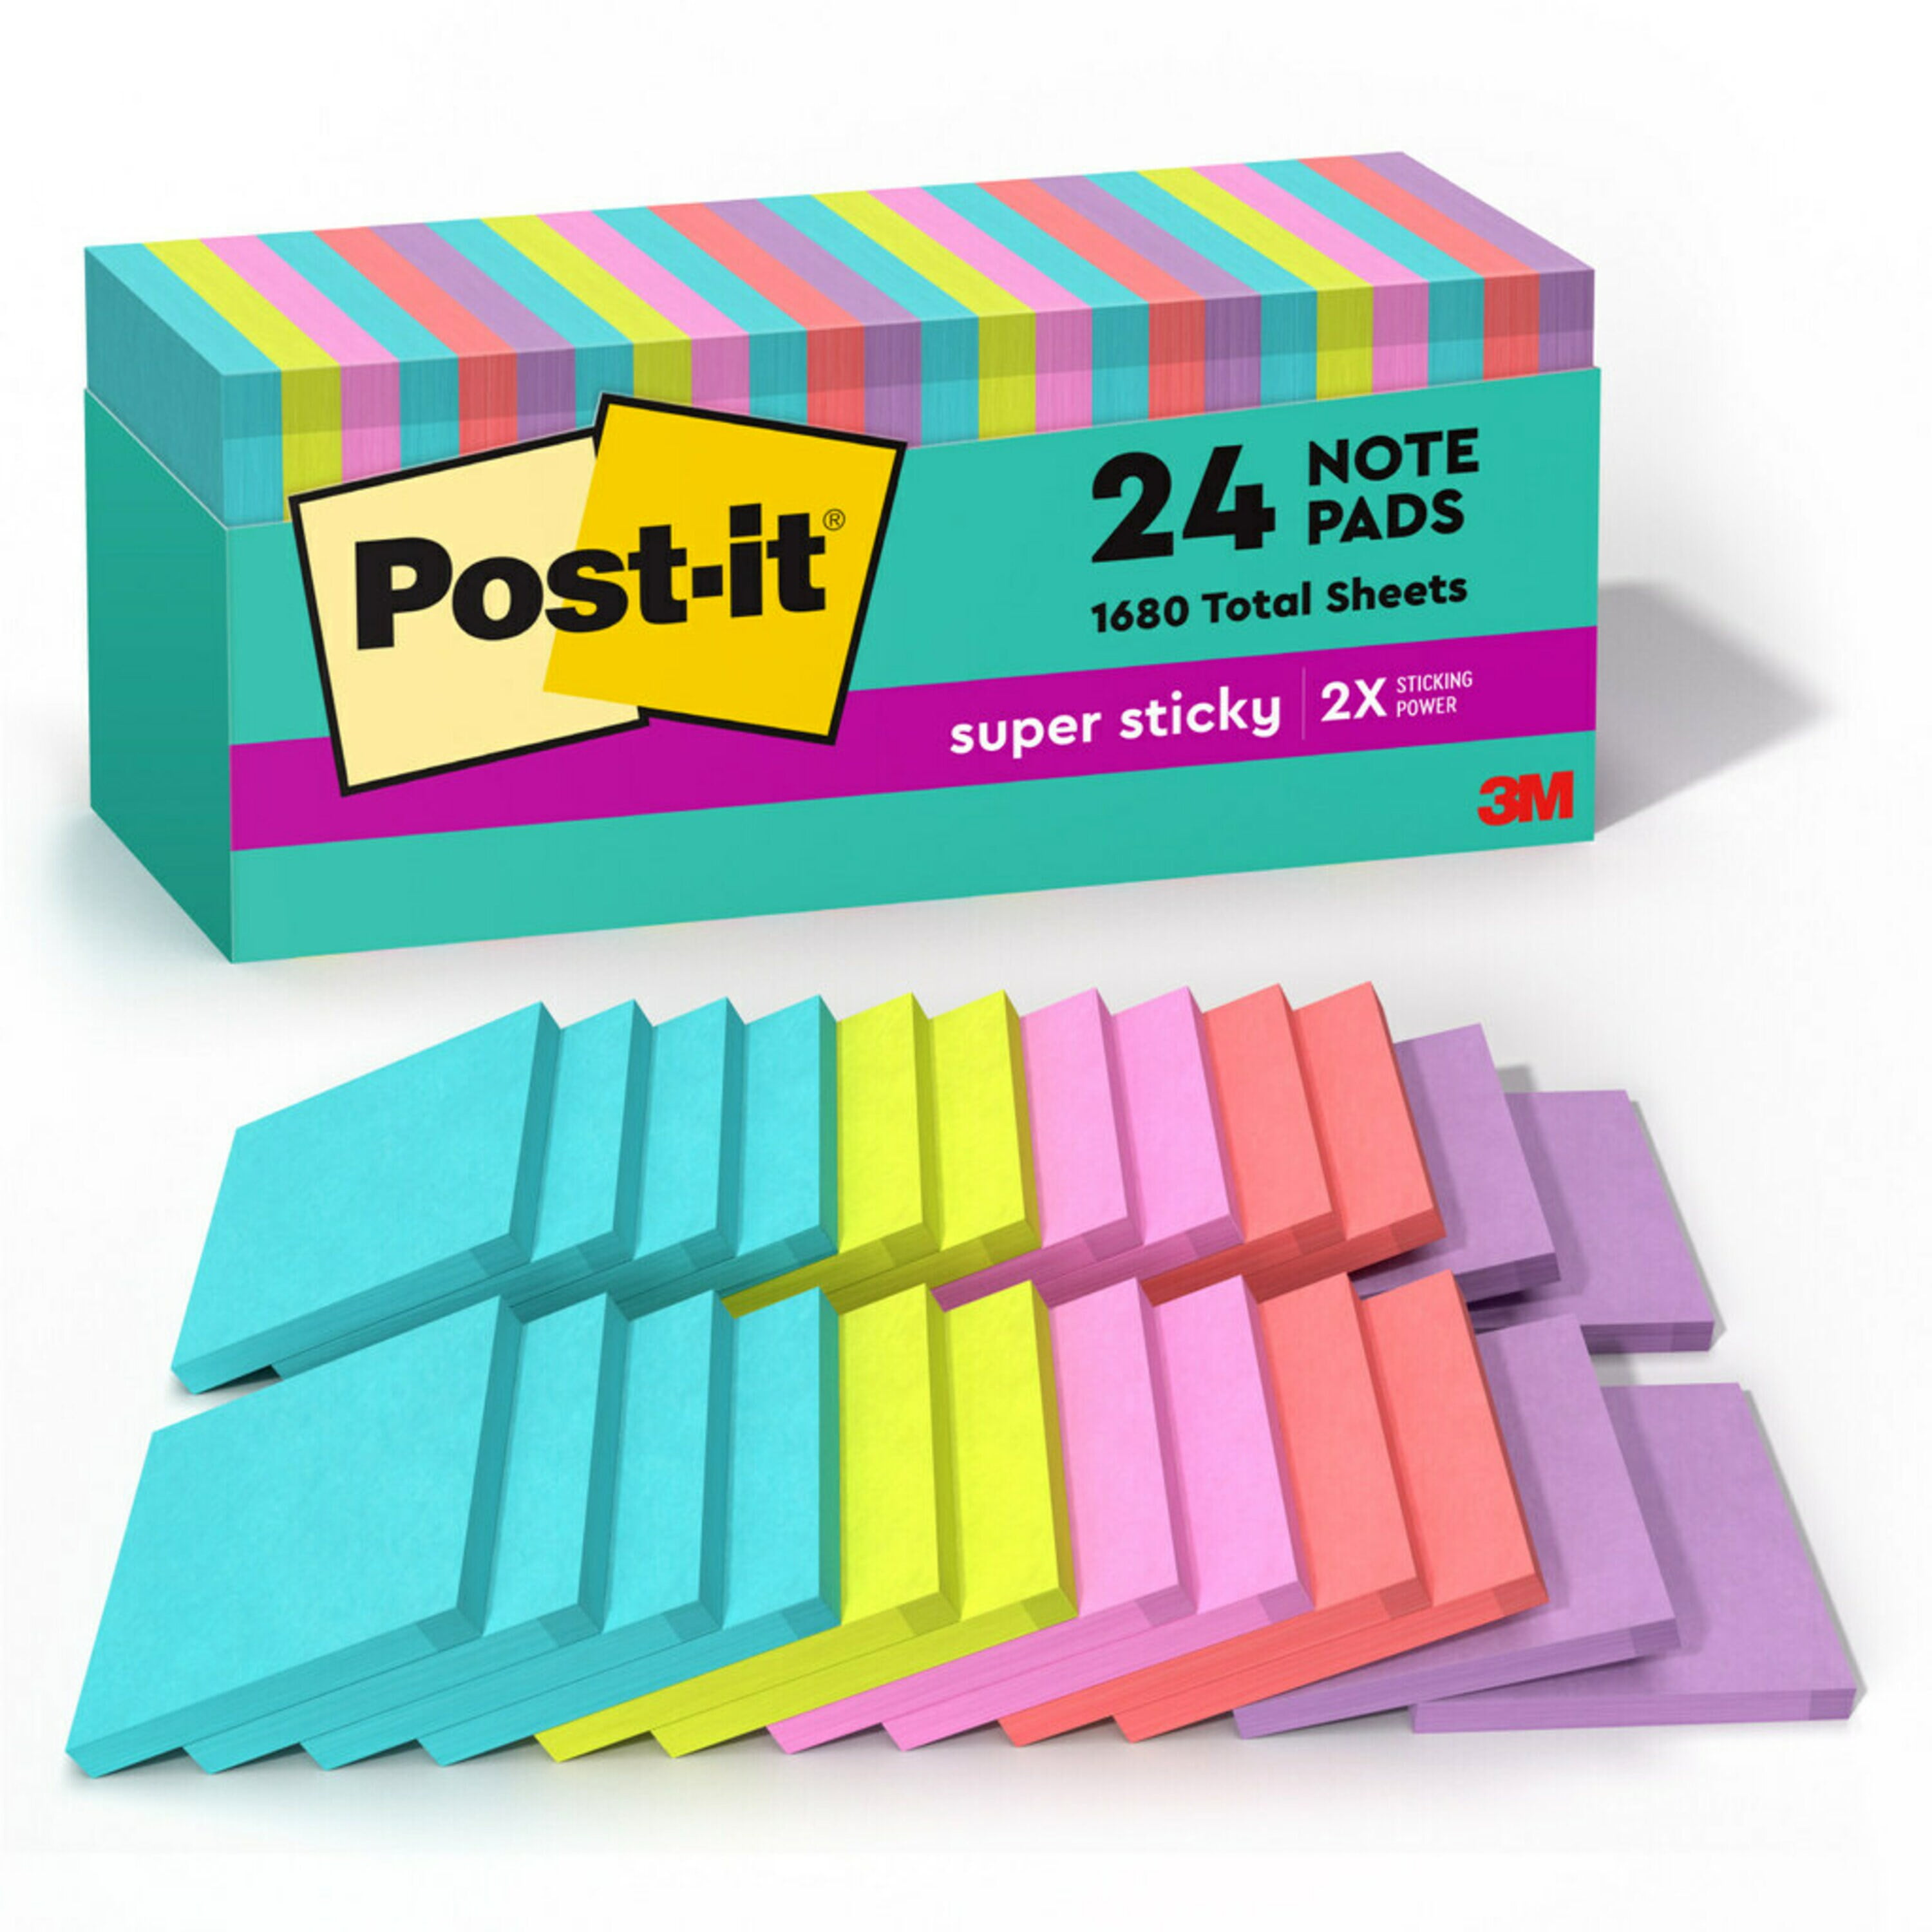 National Book Store - Post-it's Super Sticky Notes come in 4 vibrant colors  for easy color-coding, and a large 8 x 6 size that gives you more space  for your notes. Get